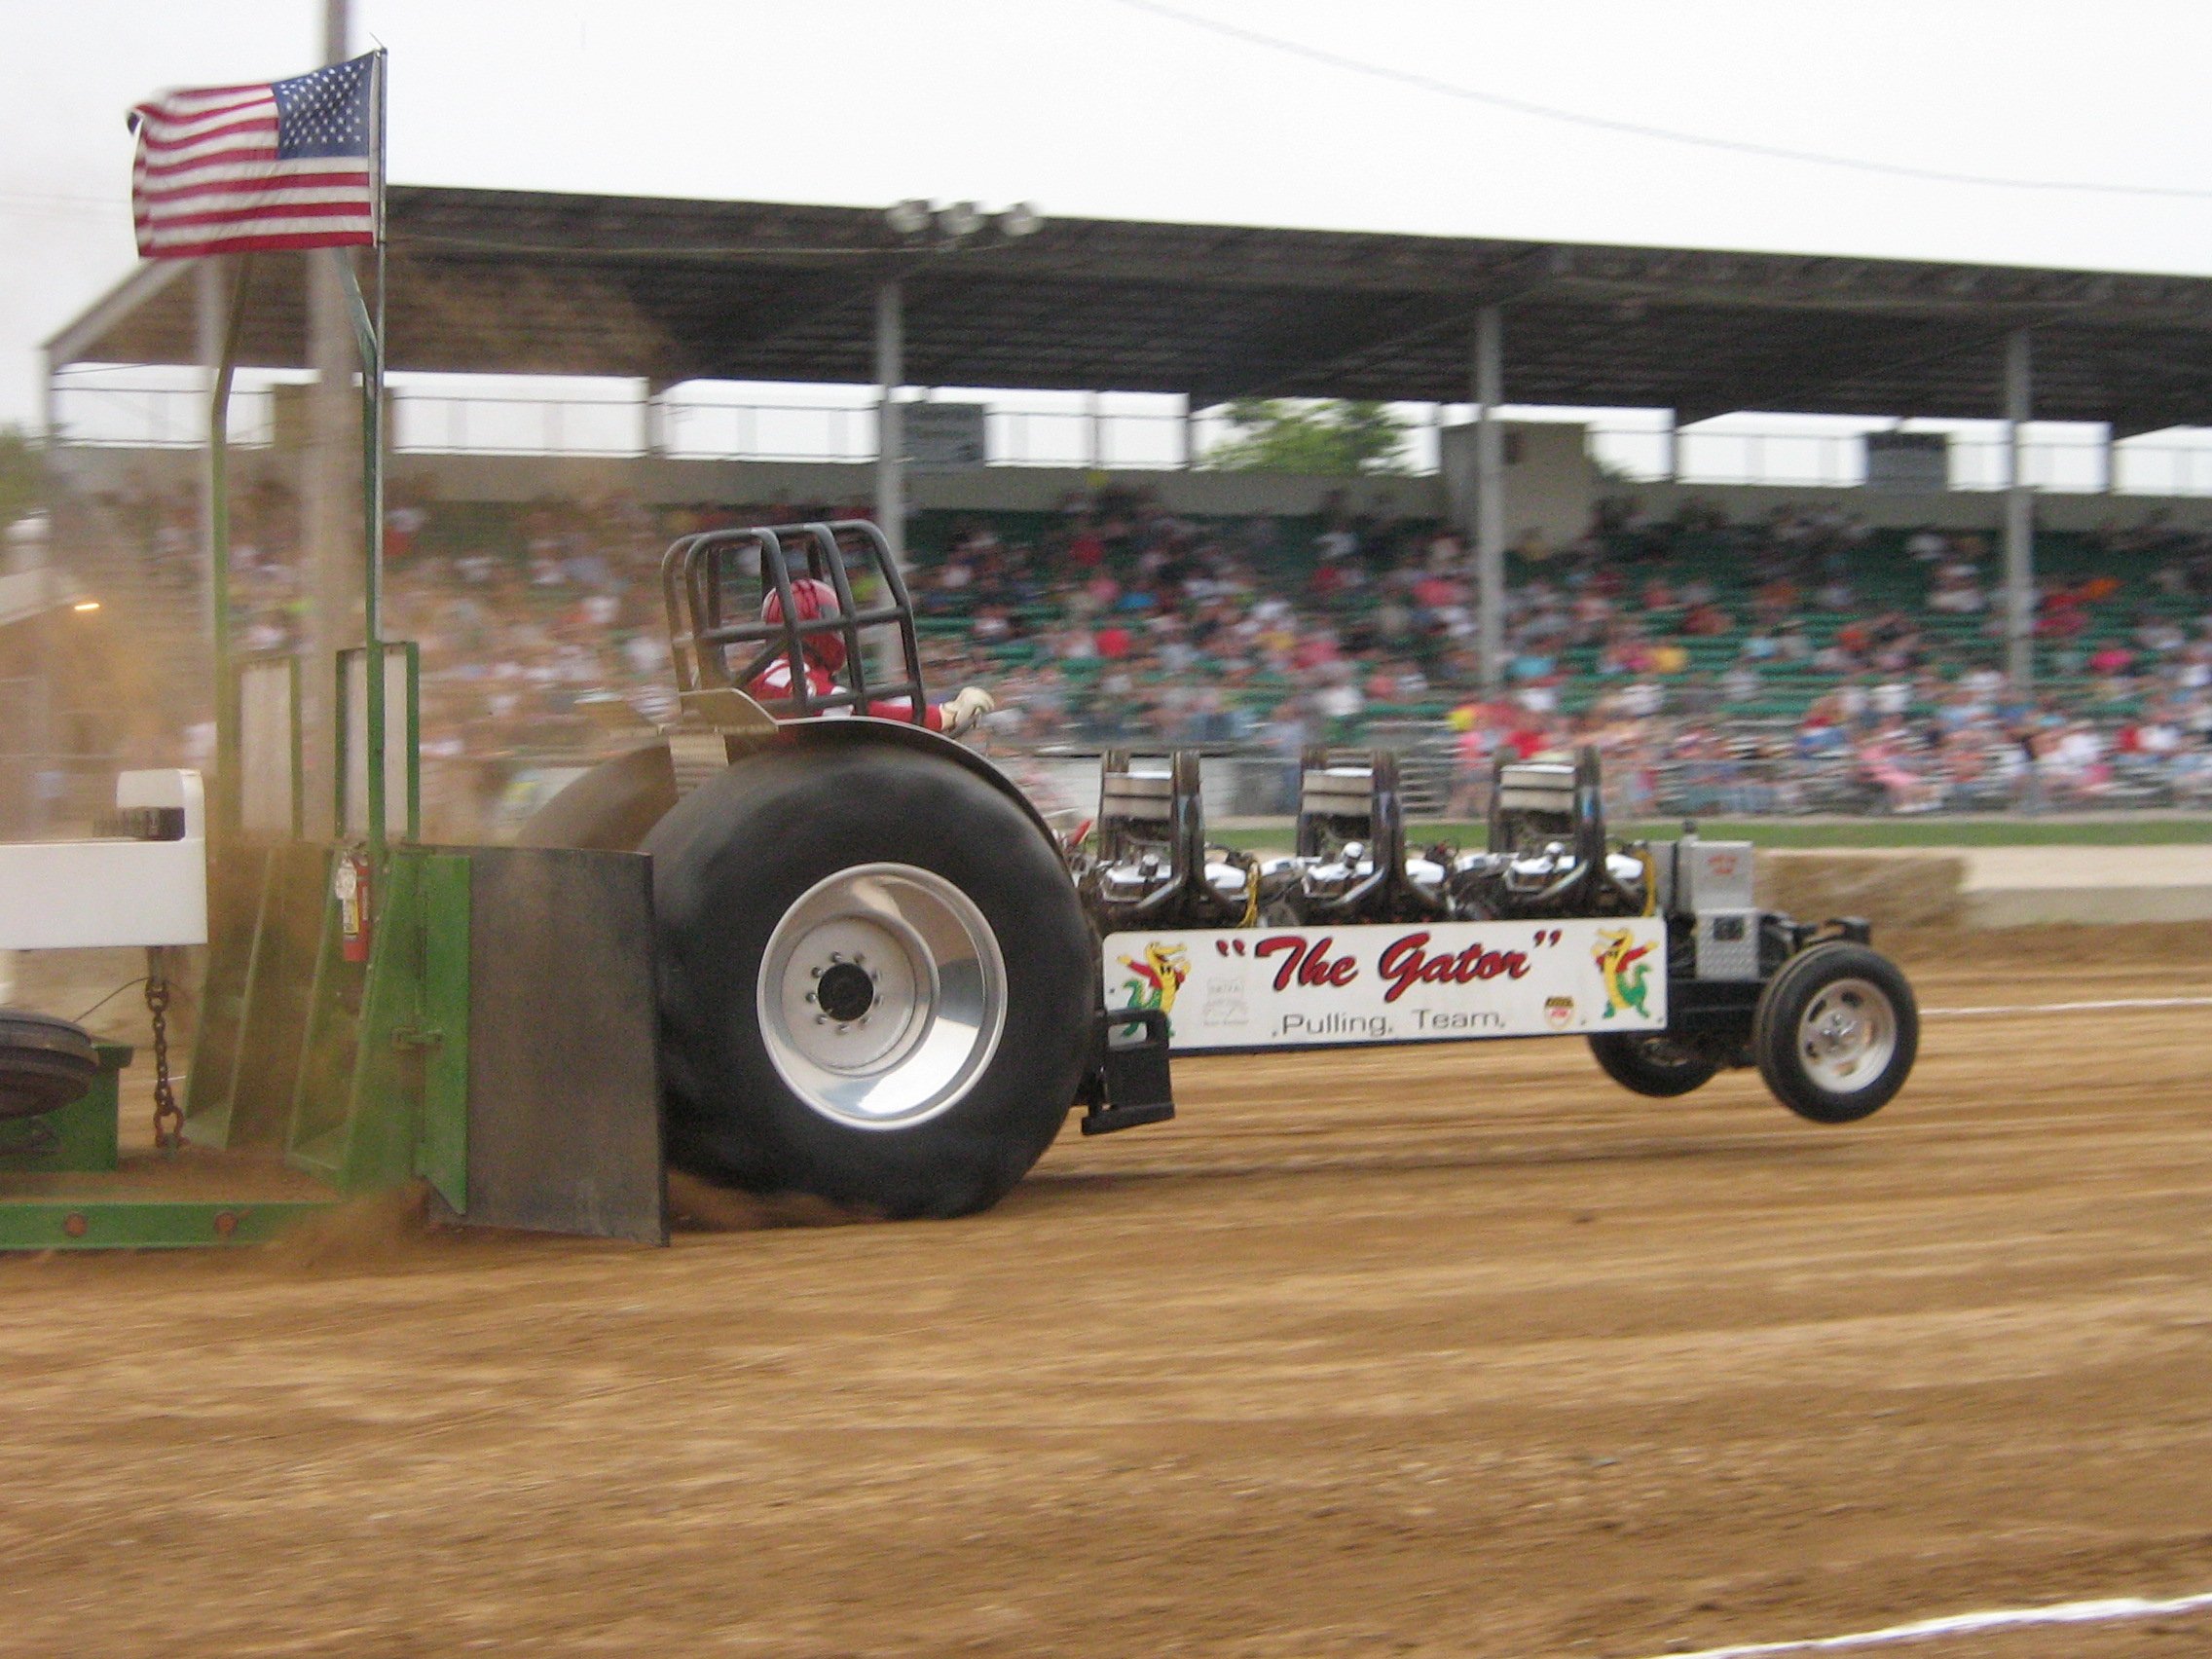 tractor pulling, Race, Racing, Hot, Rod, Rods, Tractor Wallpaper